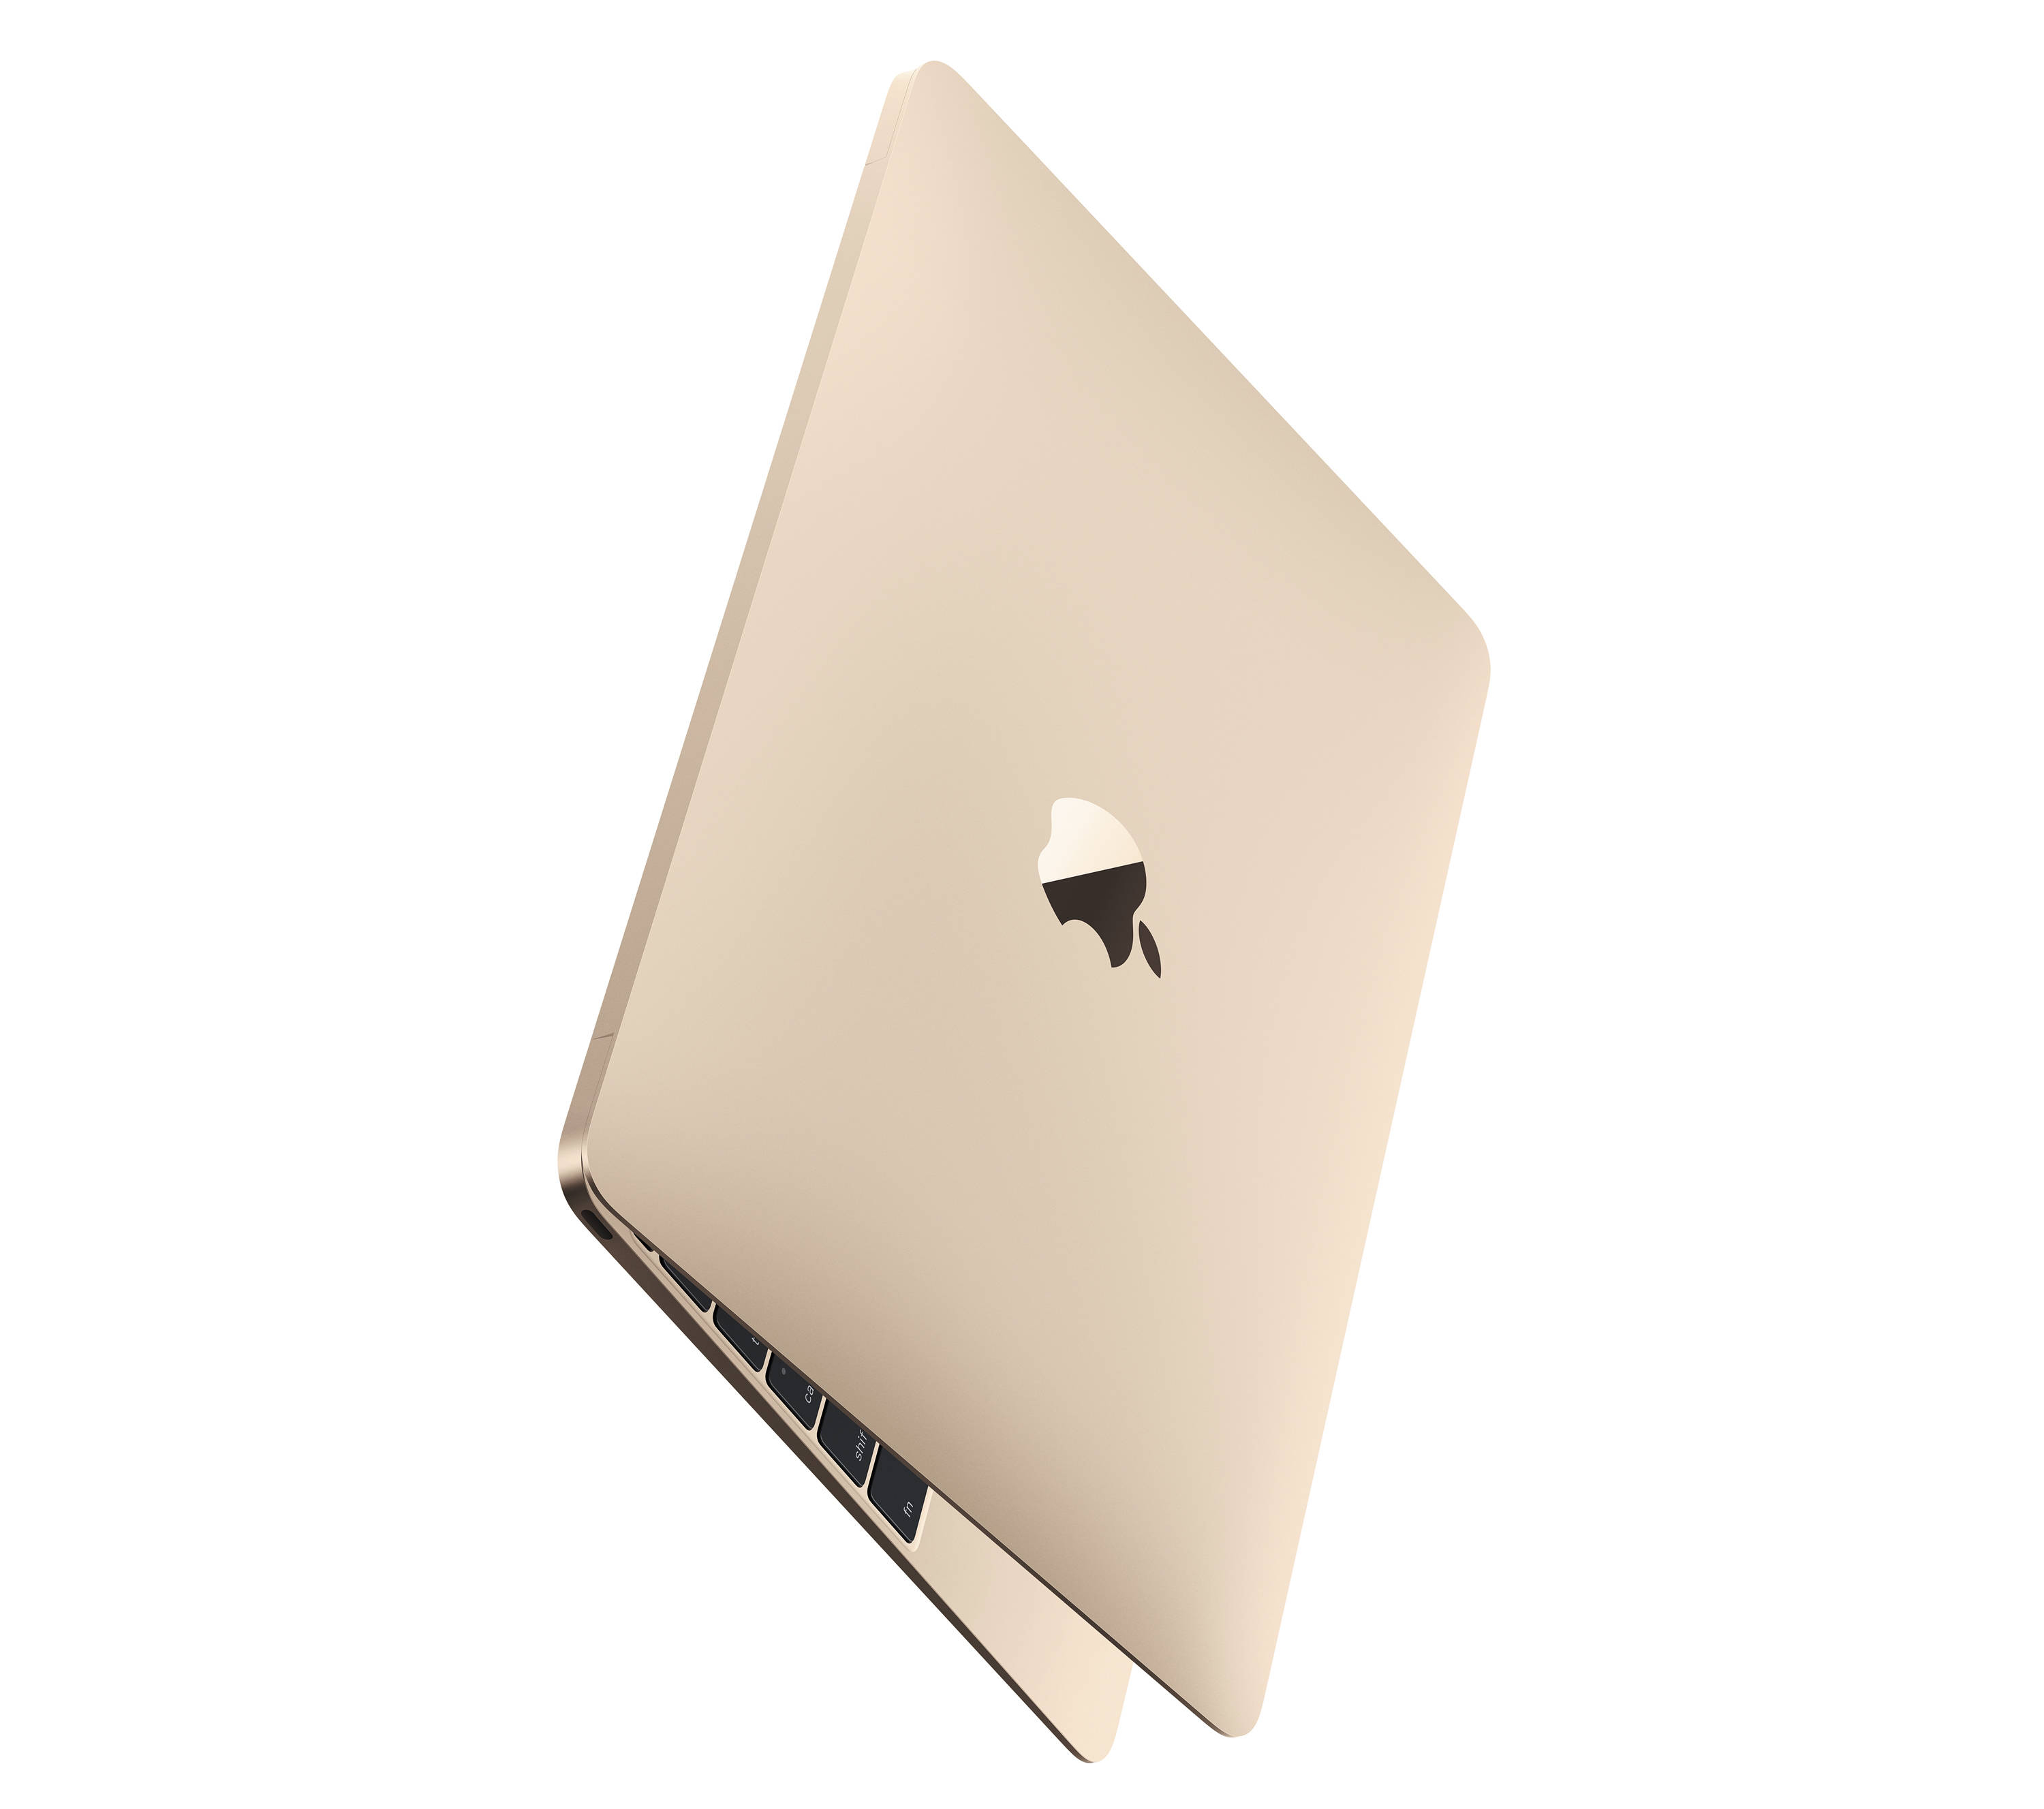 The 12-inch Apple MacBook has some surprises under the hood - CNET